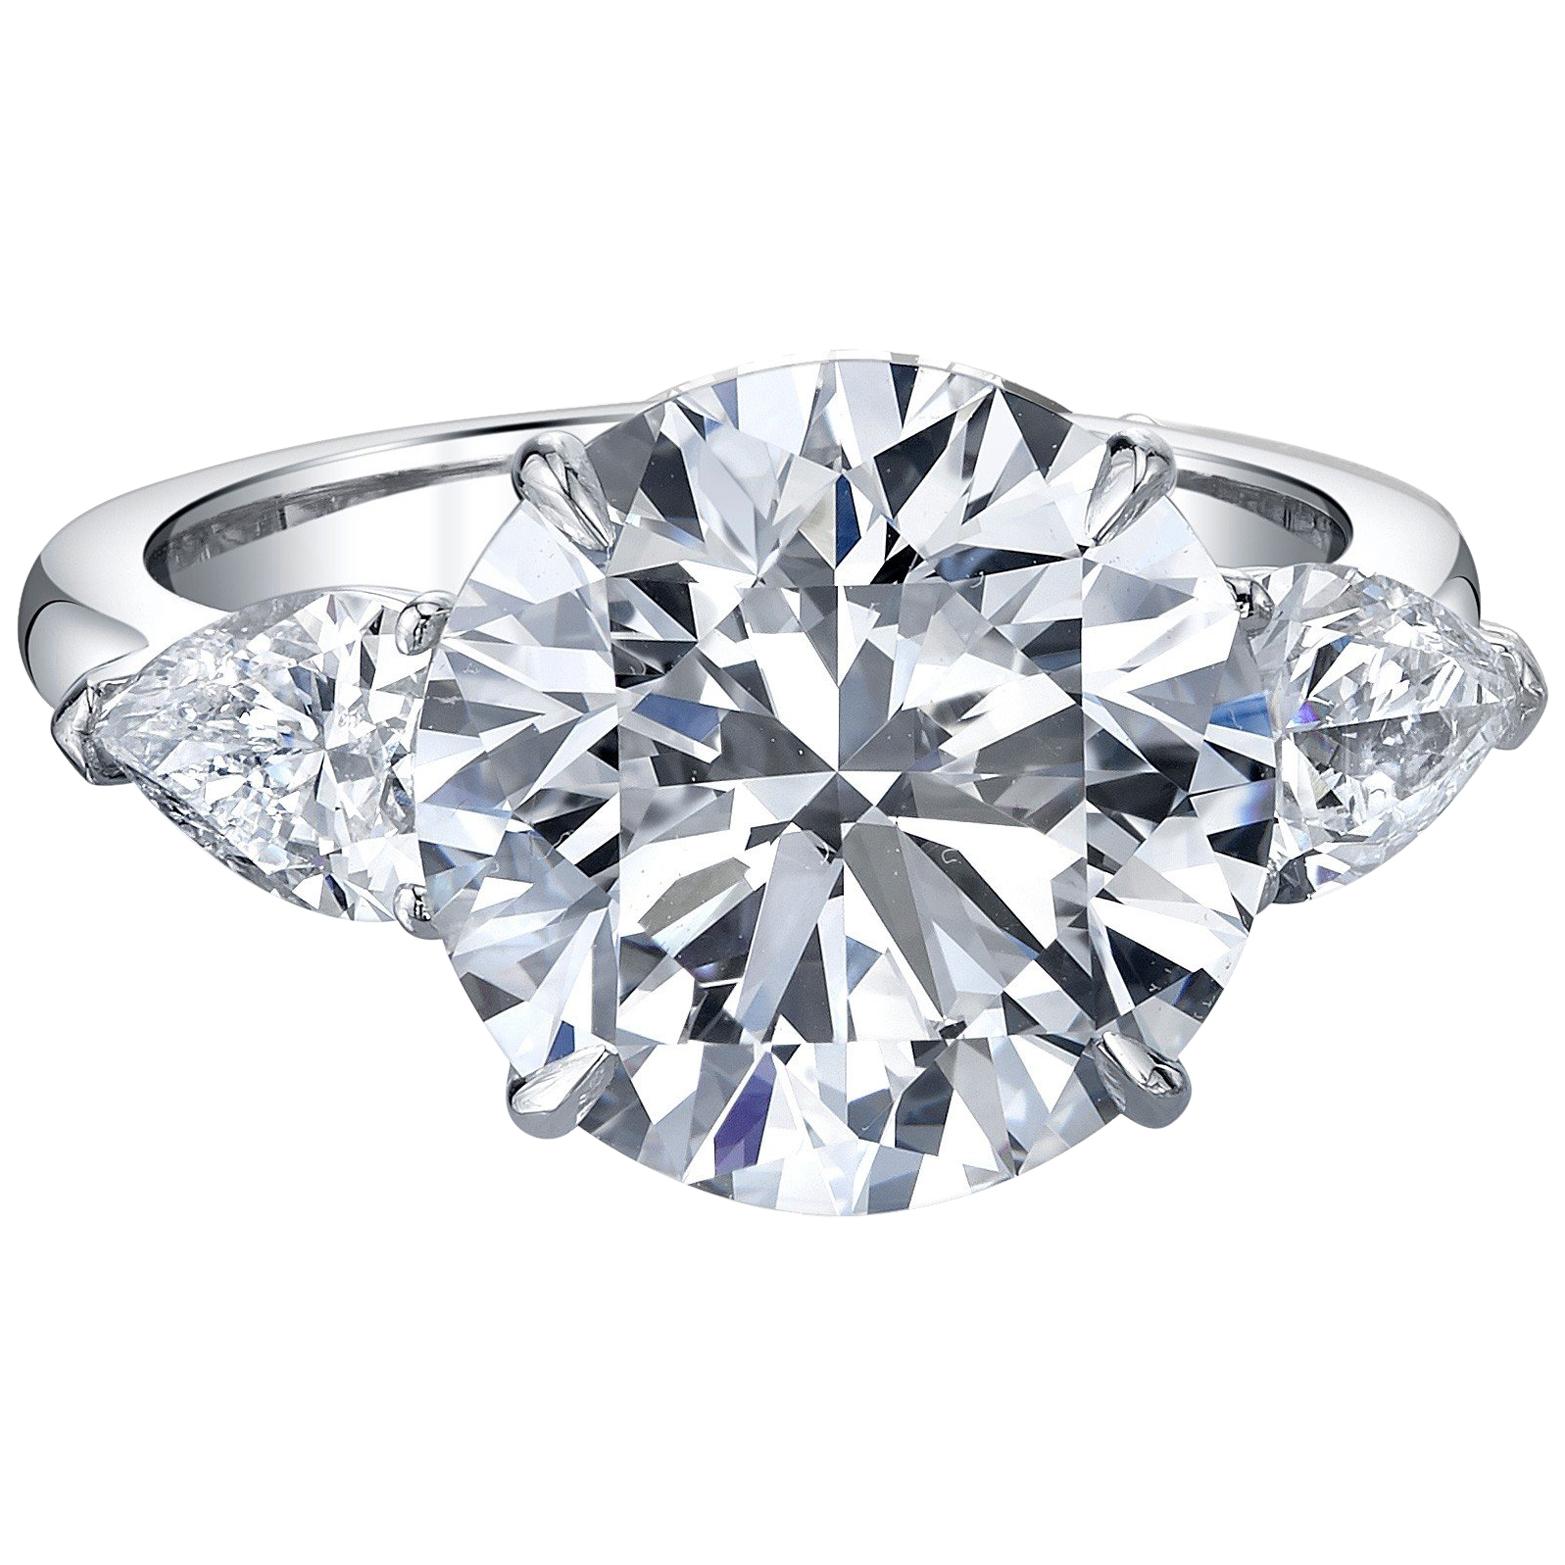 2 GIA Round Cut Diamond Engagement in Platinum 950 Setting For Sale